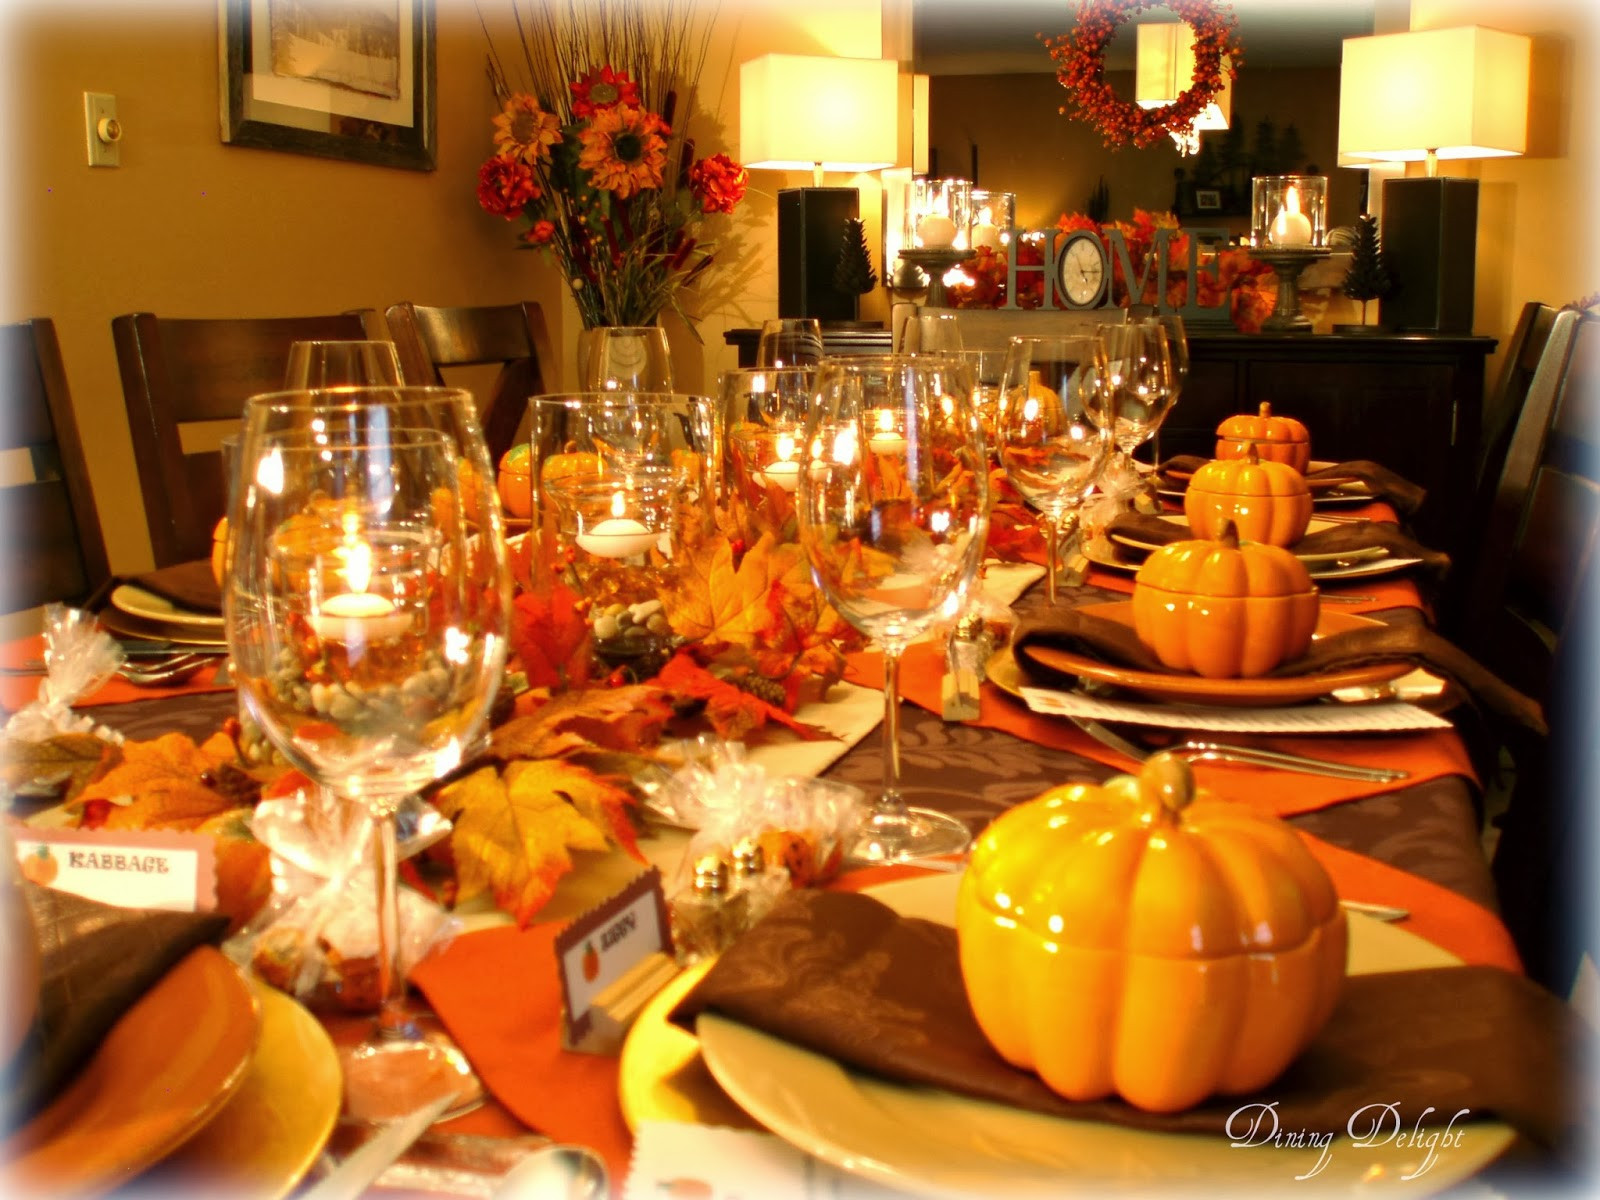 Fall Dinner Party
 Dining Delight Fall Dinner Party for Ten